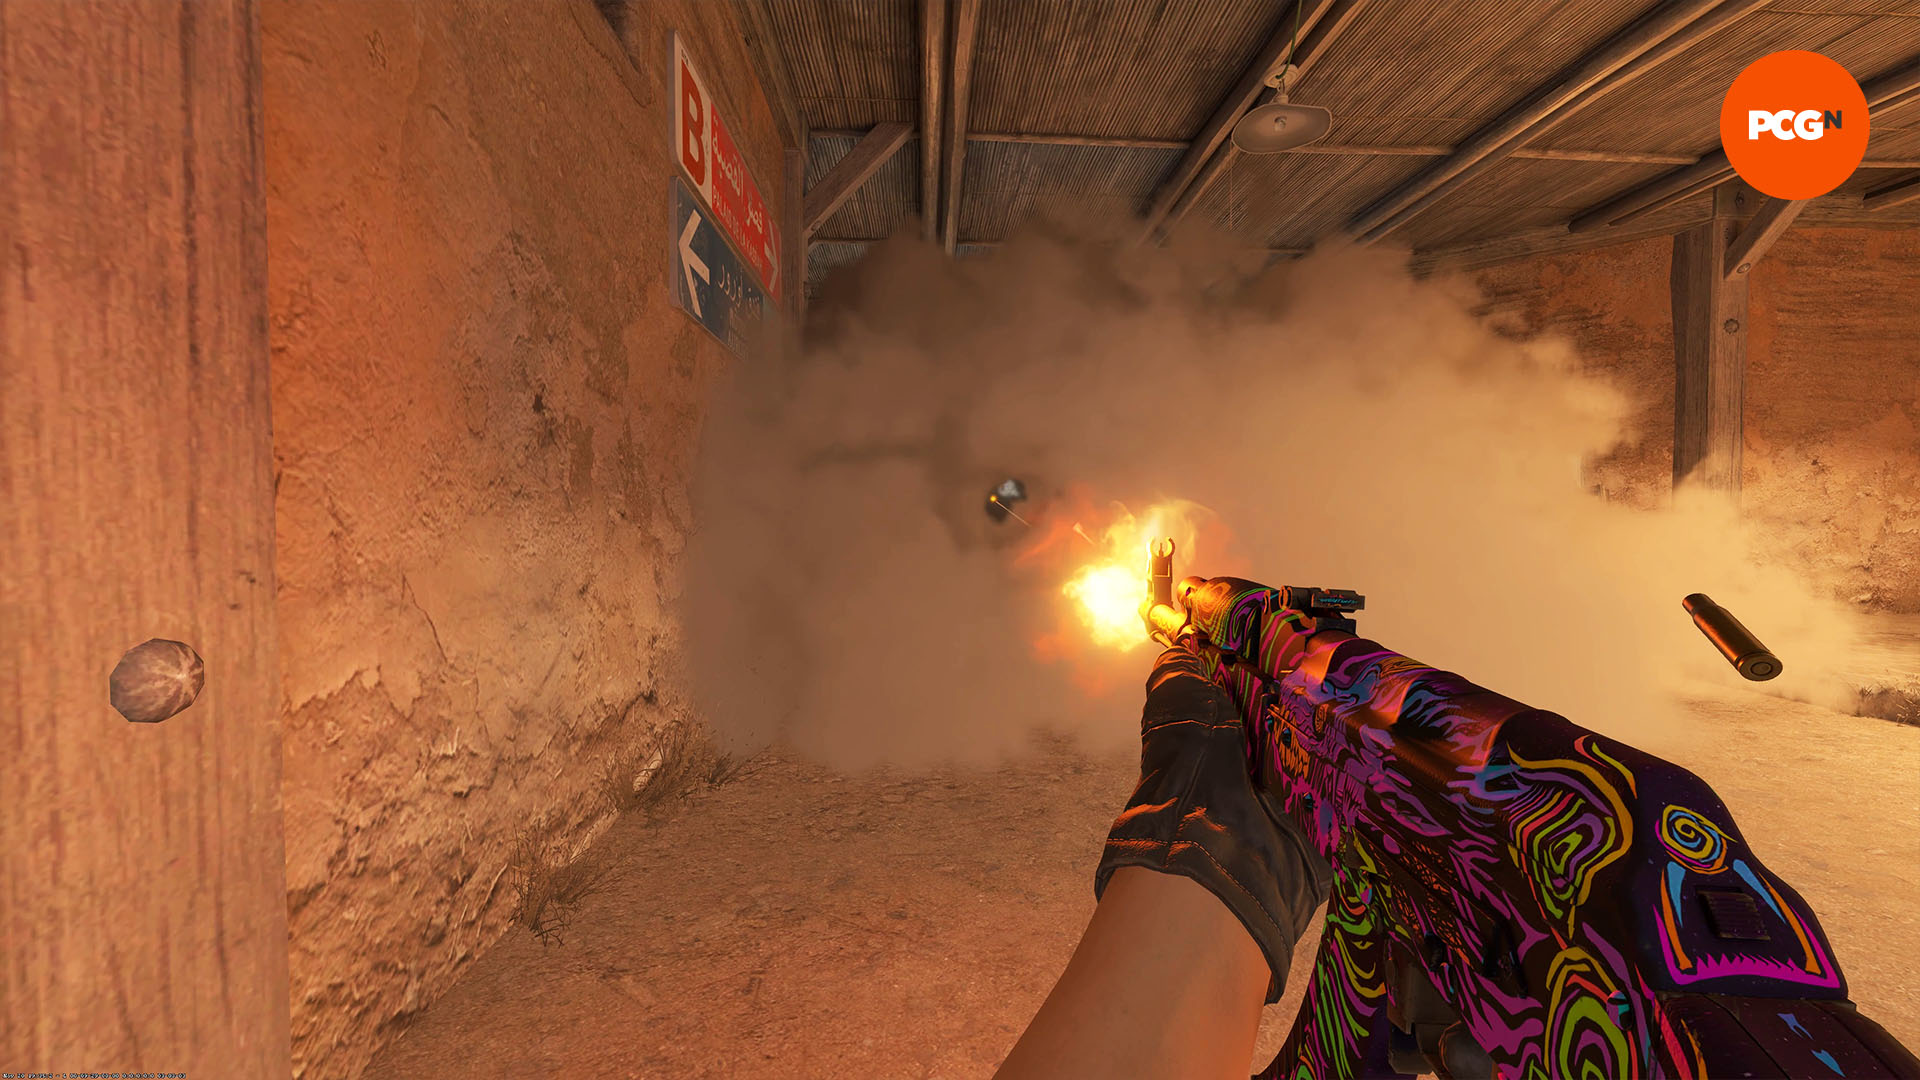 Counter-Strike 2 moves to MR12 – shorter but more exciting matches